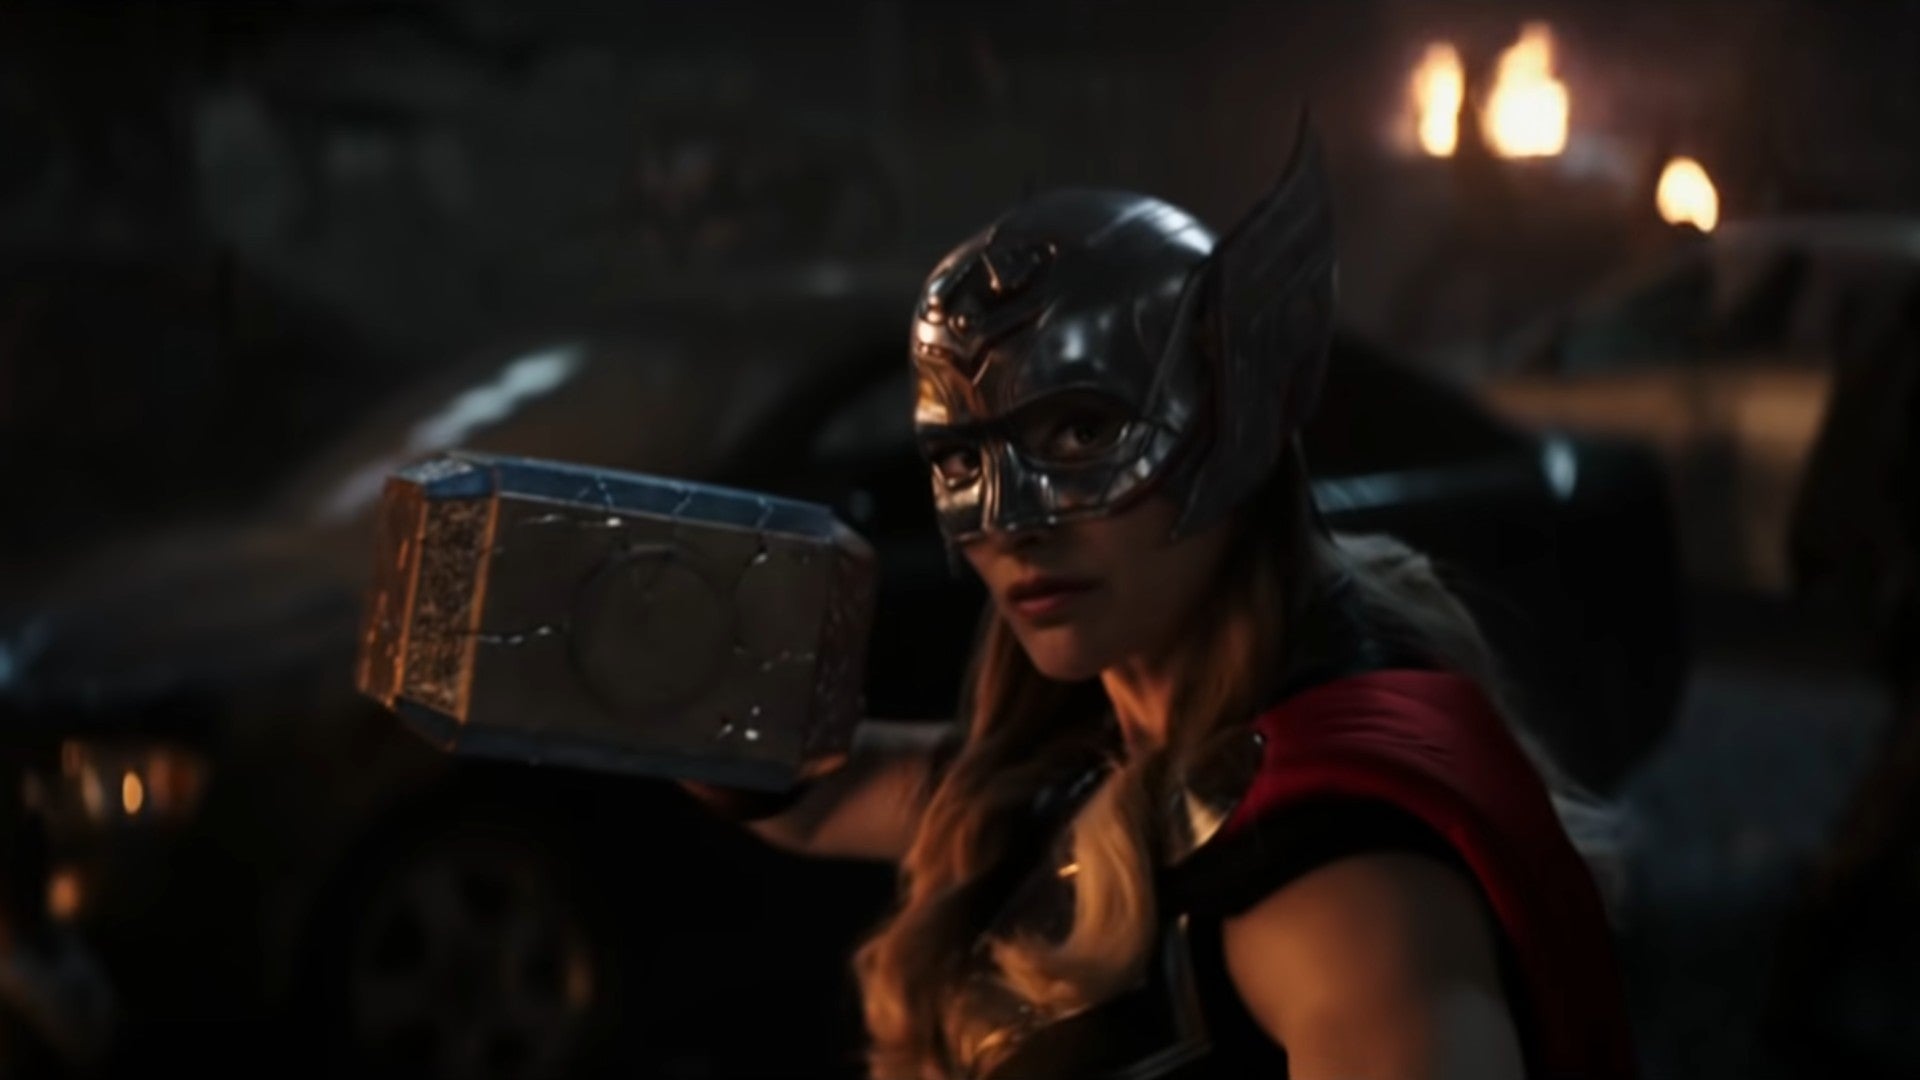 Still from Love and Thunder trailer of Natalie Portman as Jane Foster/The Mighty Thor